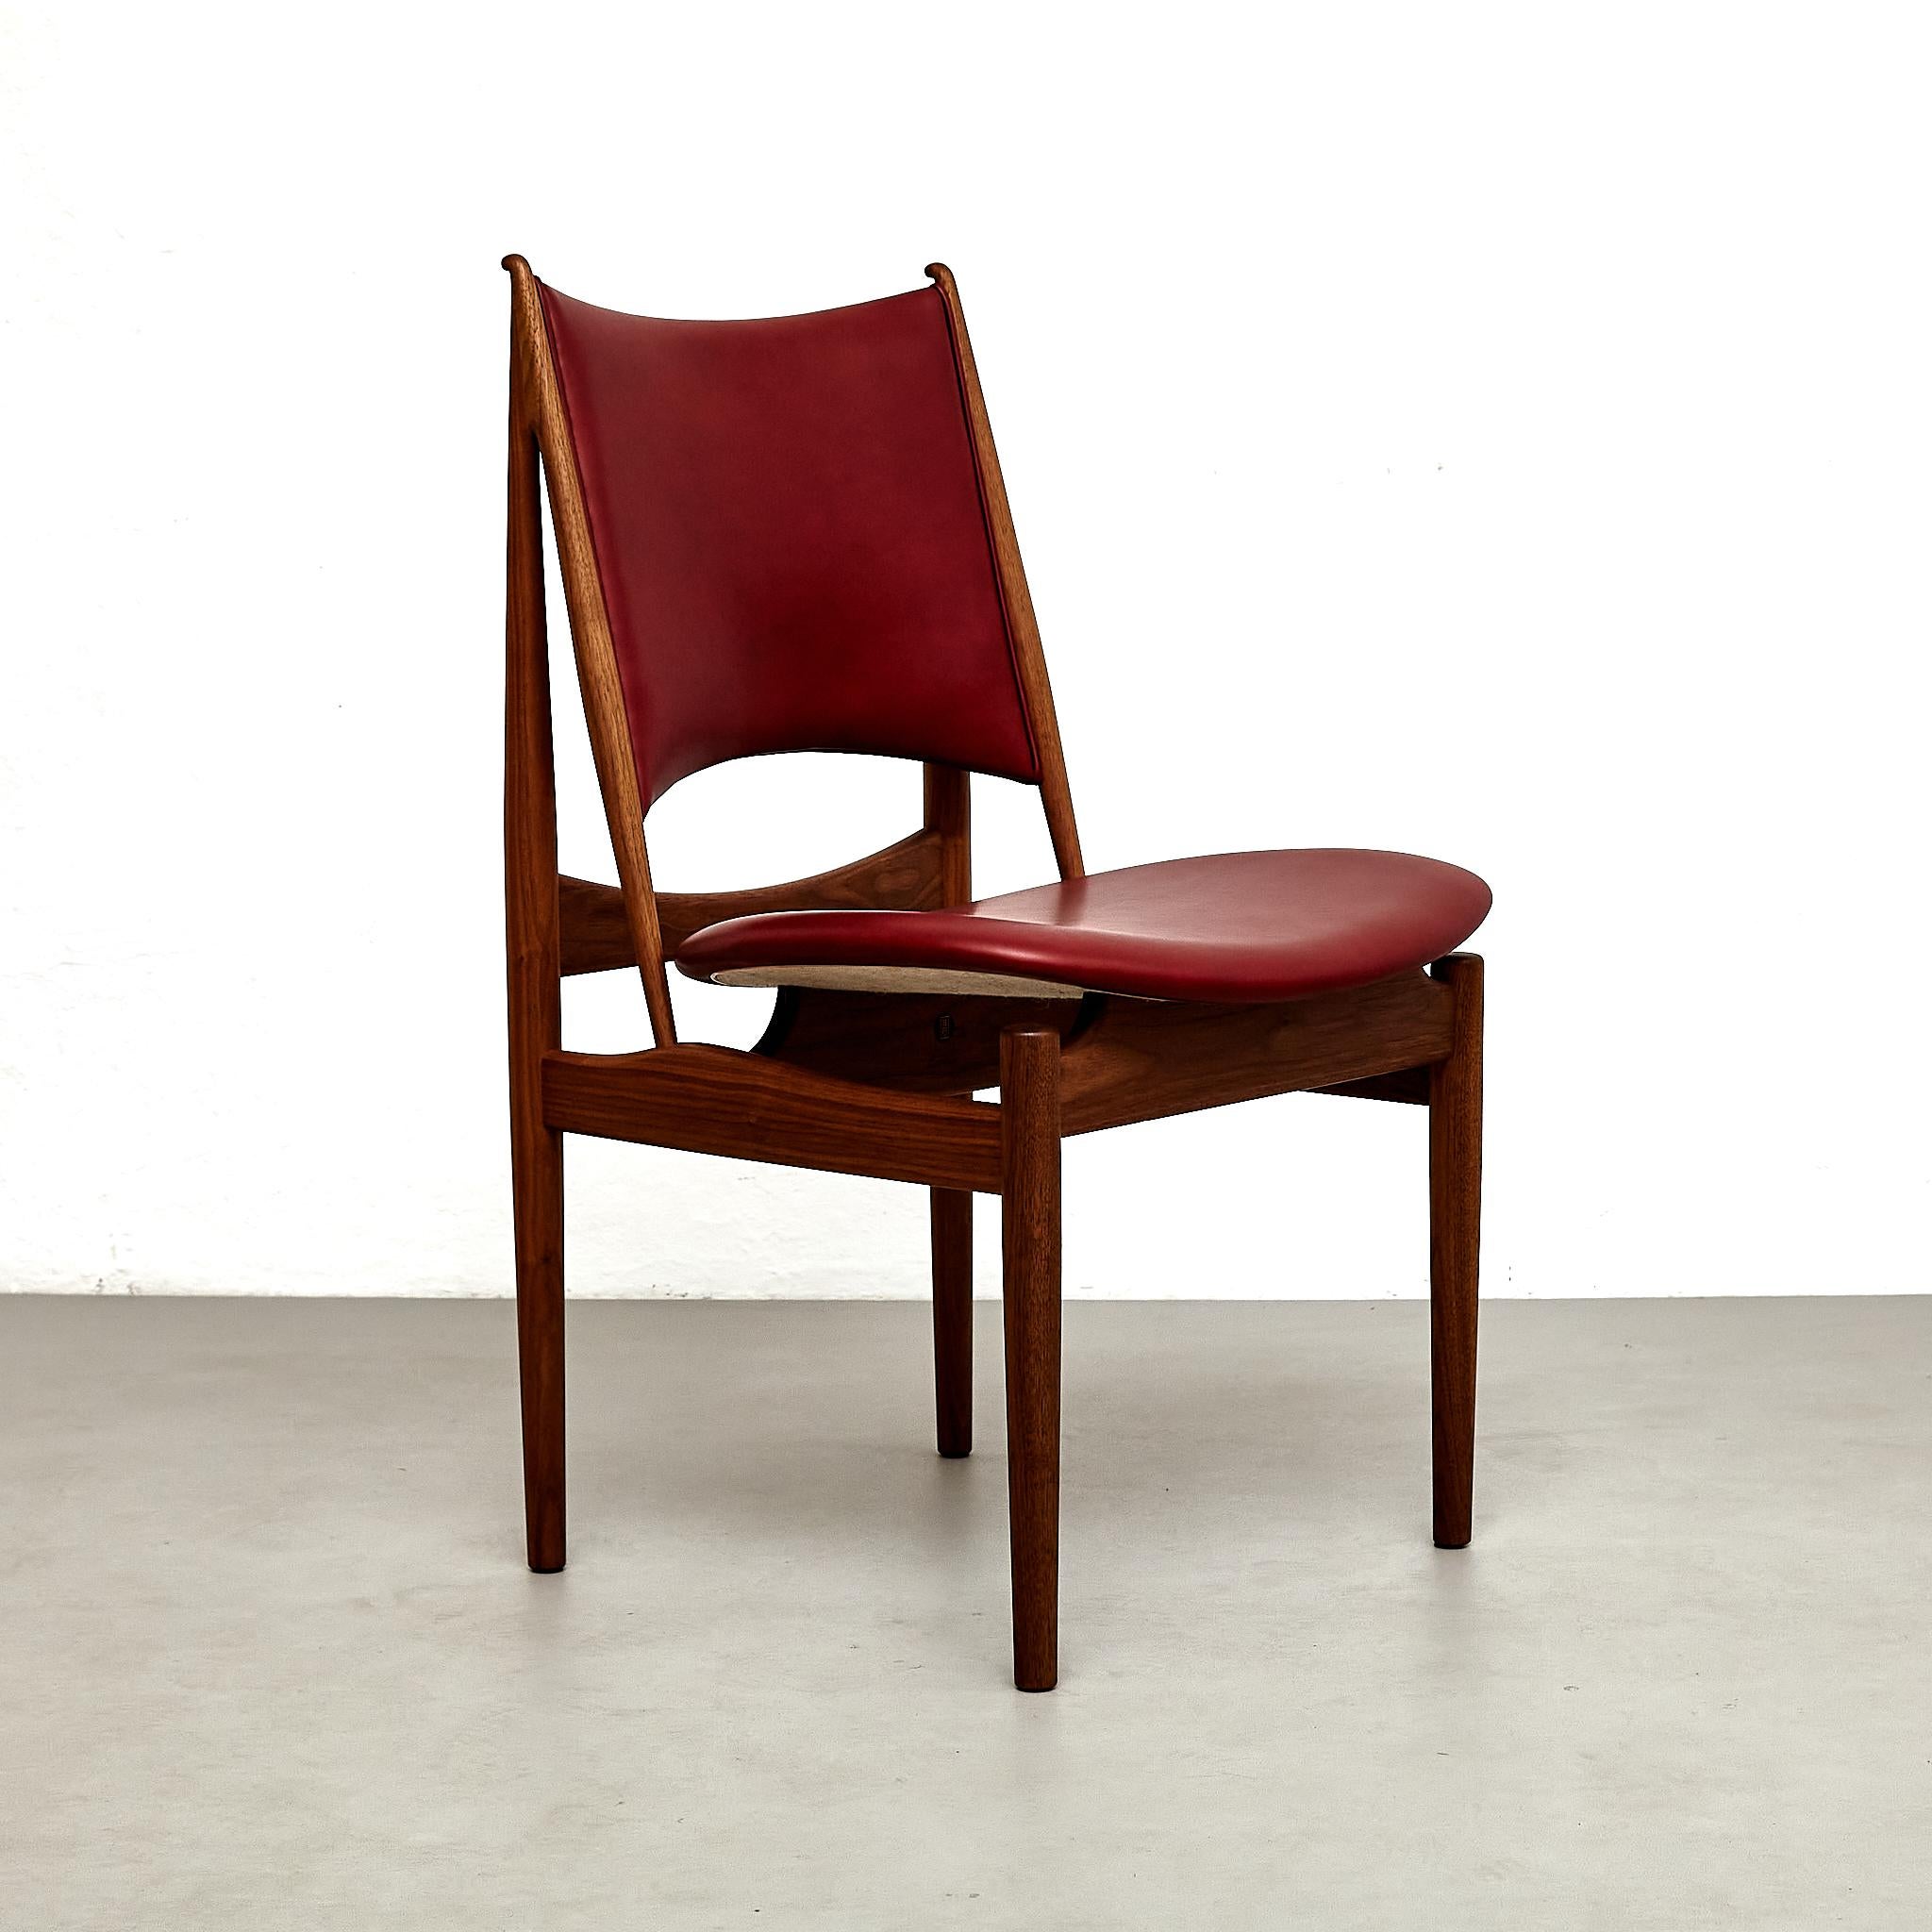 Armchair designed by Finn Juhl in 1949, relaunched in 2014.
Manufactured by House of Finn Juhl in Denmark.

Design critics have described Finn Juhl’s Egyptian chair as a miraculous mix of ancient Egyptian design principles, modern rhythms and